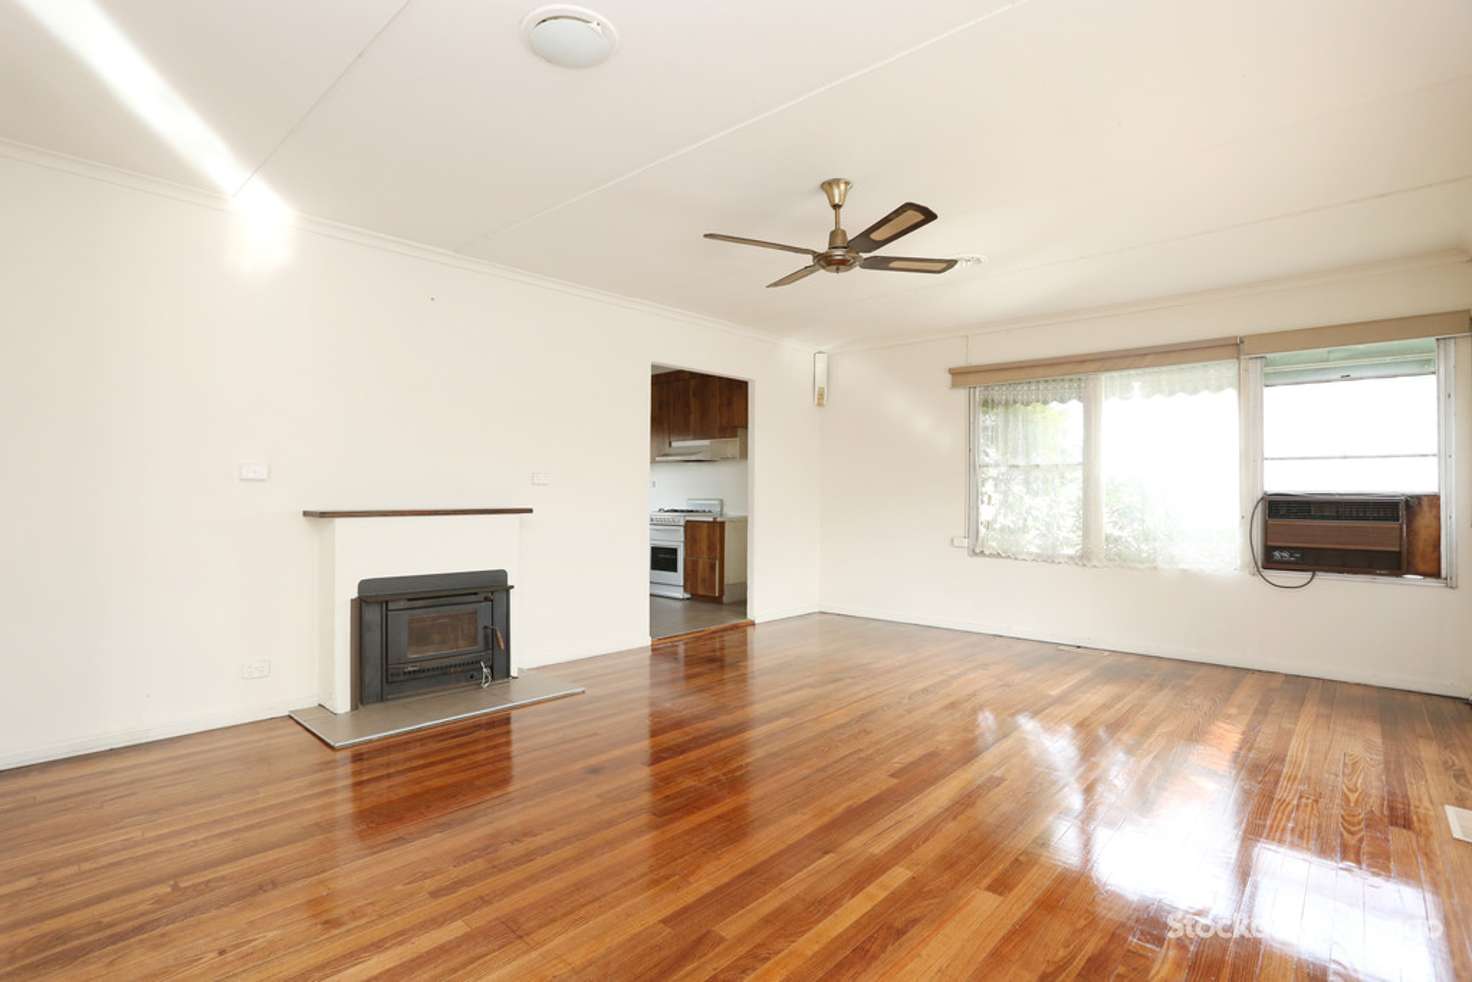 Main view of Homely house listing, 12 Marong Court, Broadmeadows VIC 3047